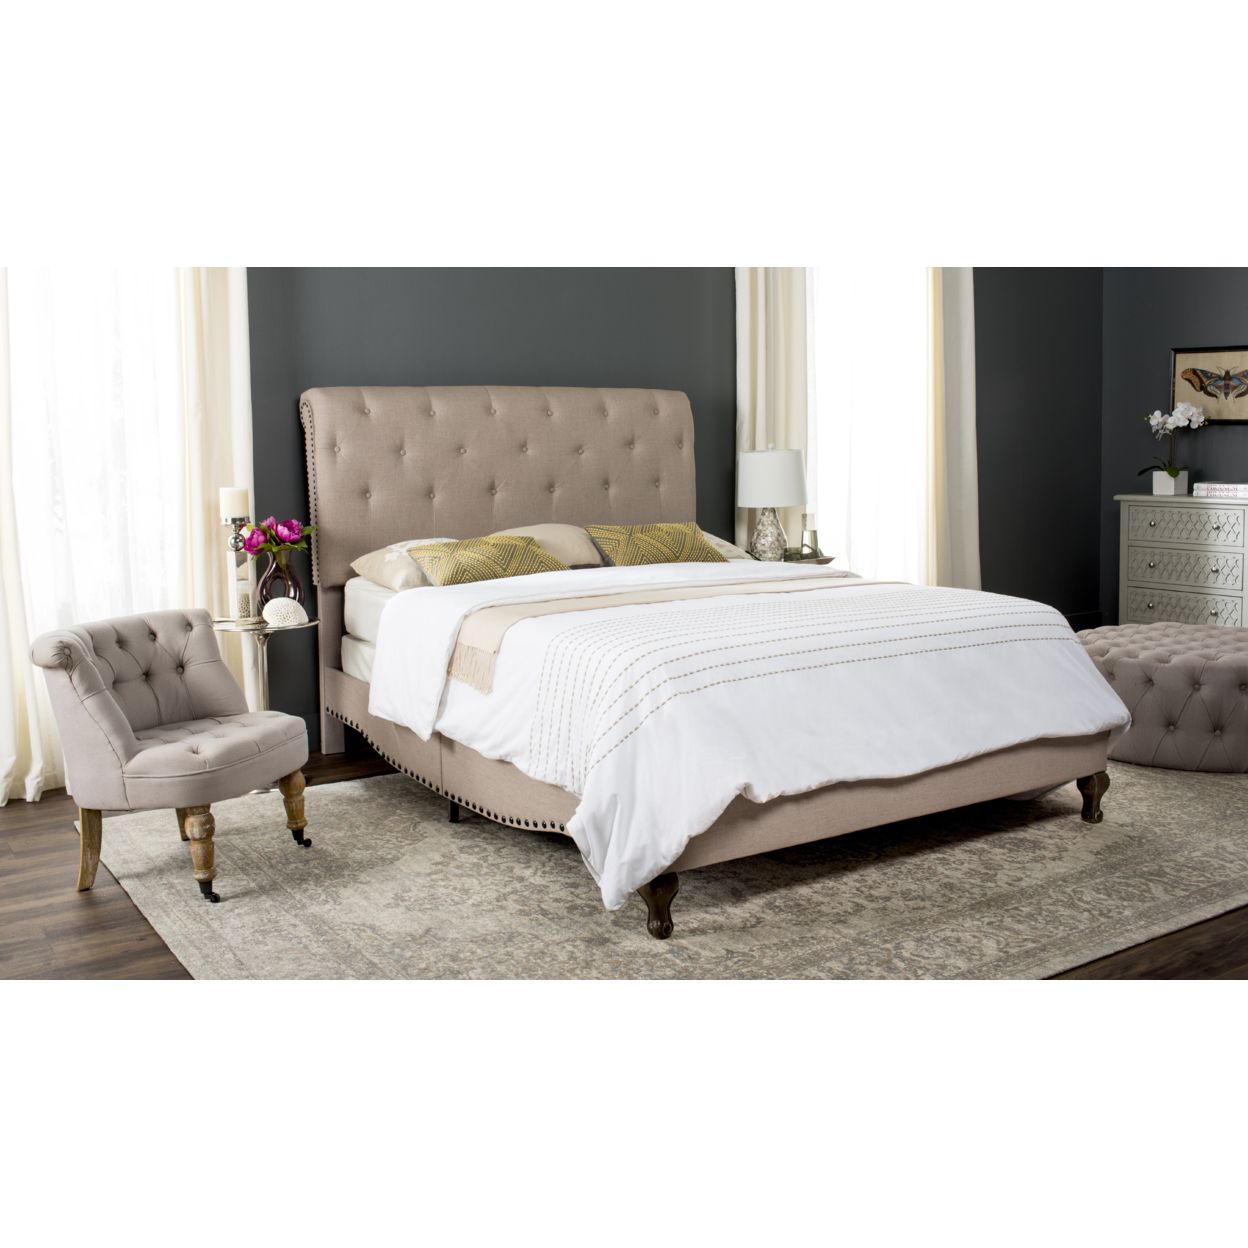 SAFAVIEH Hathaway Bed Taupe Twin